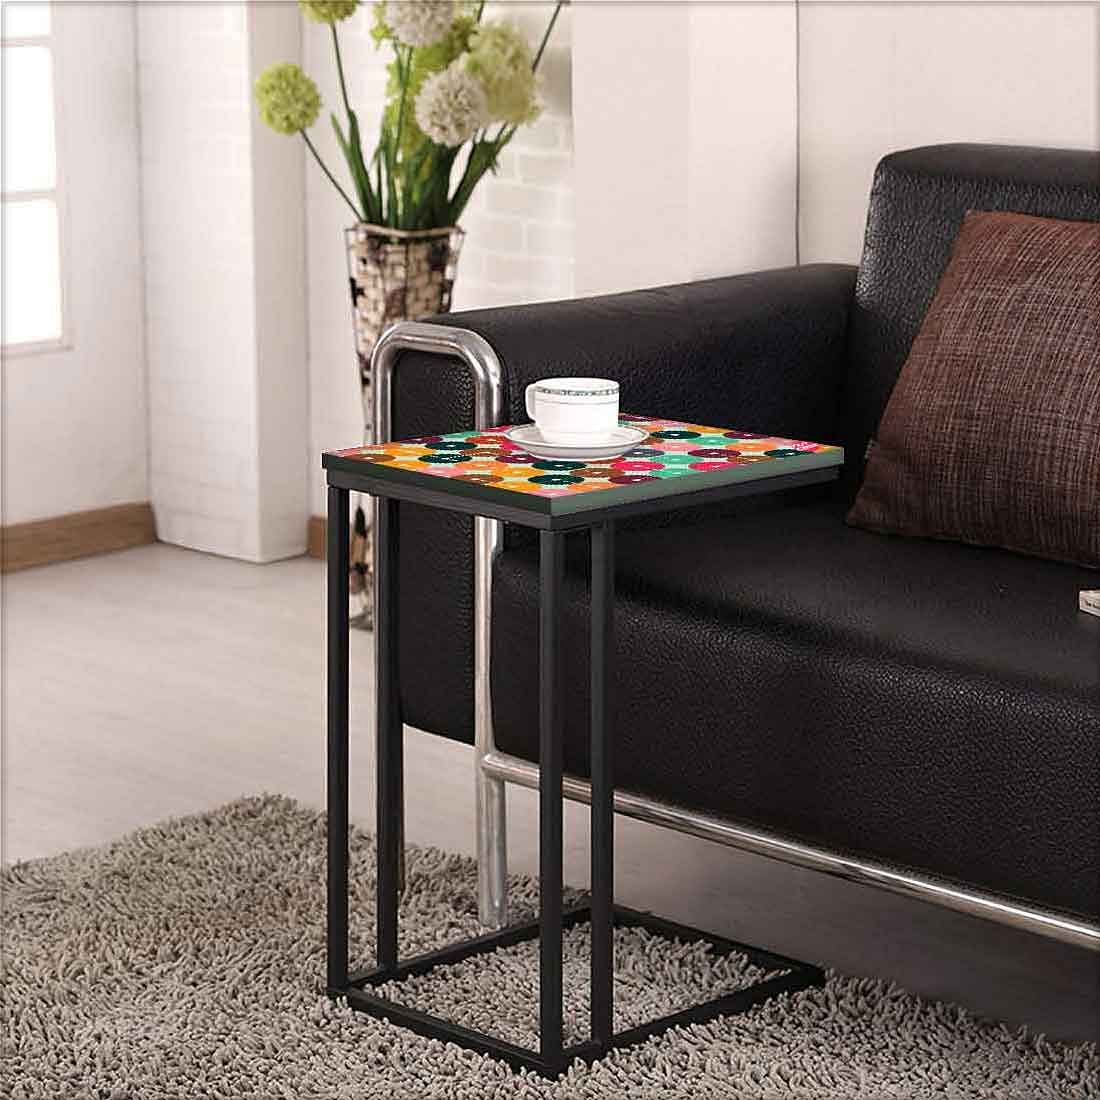 C End-Table Table For Sofa - Circle Code Pattern Nutcase